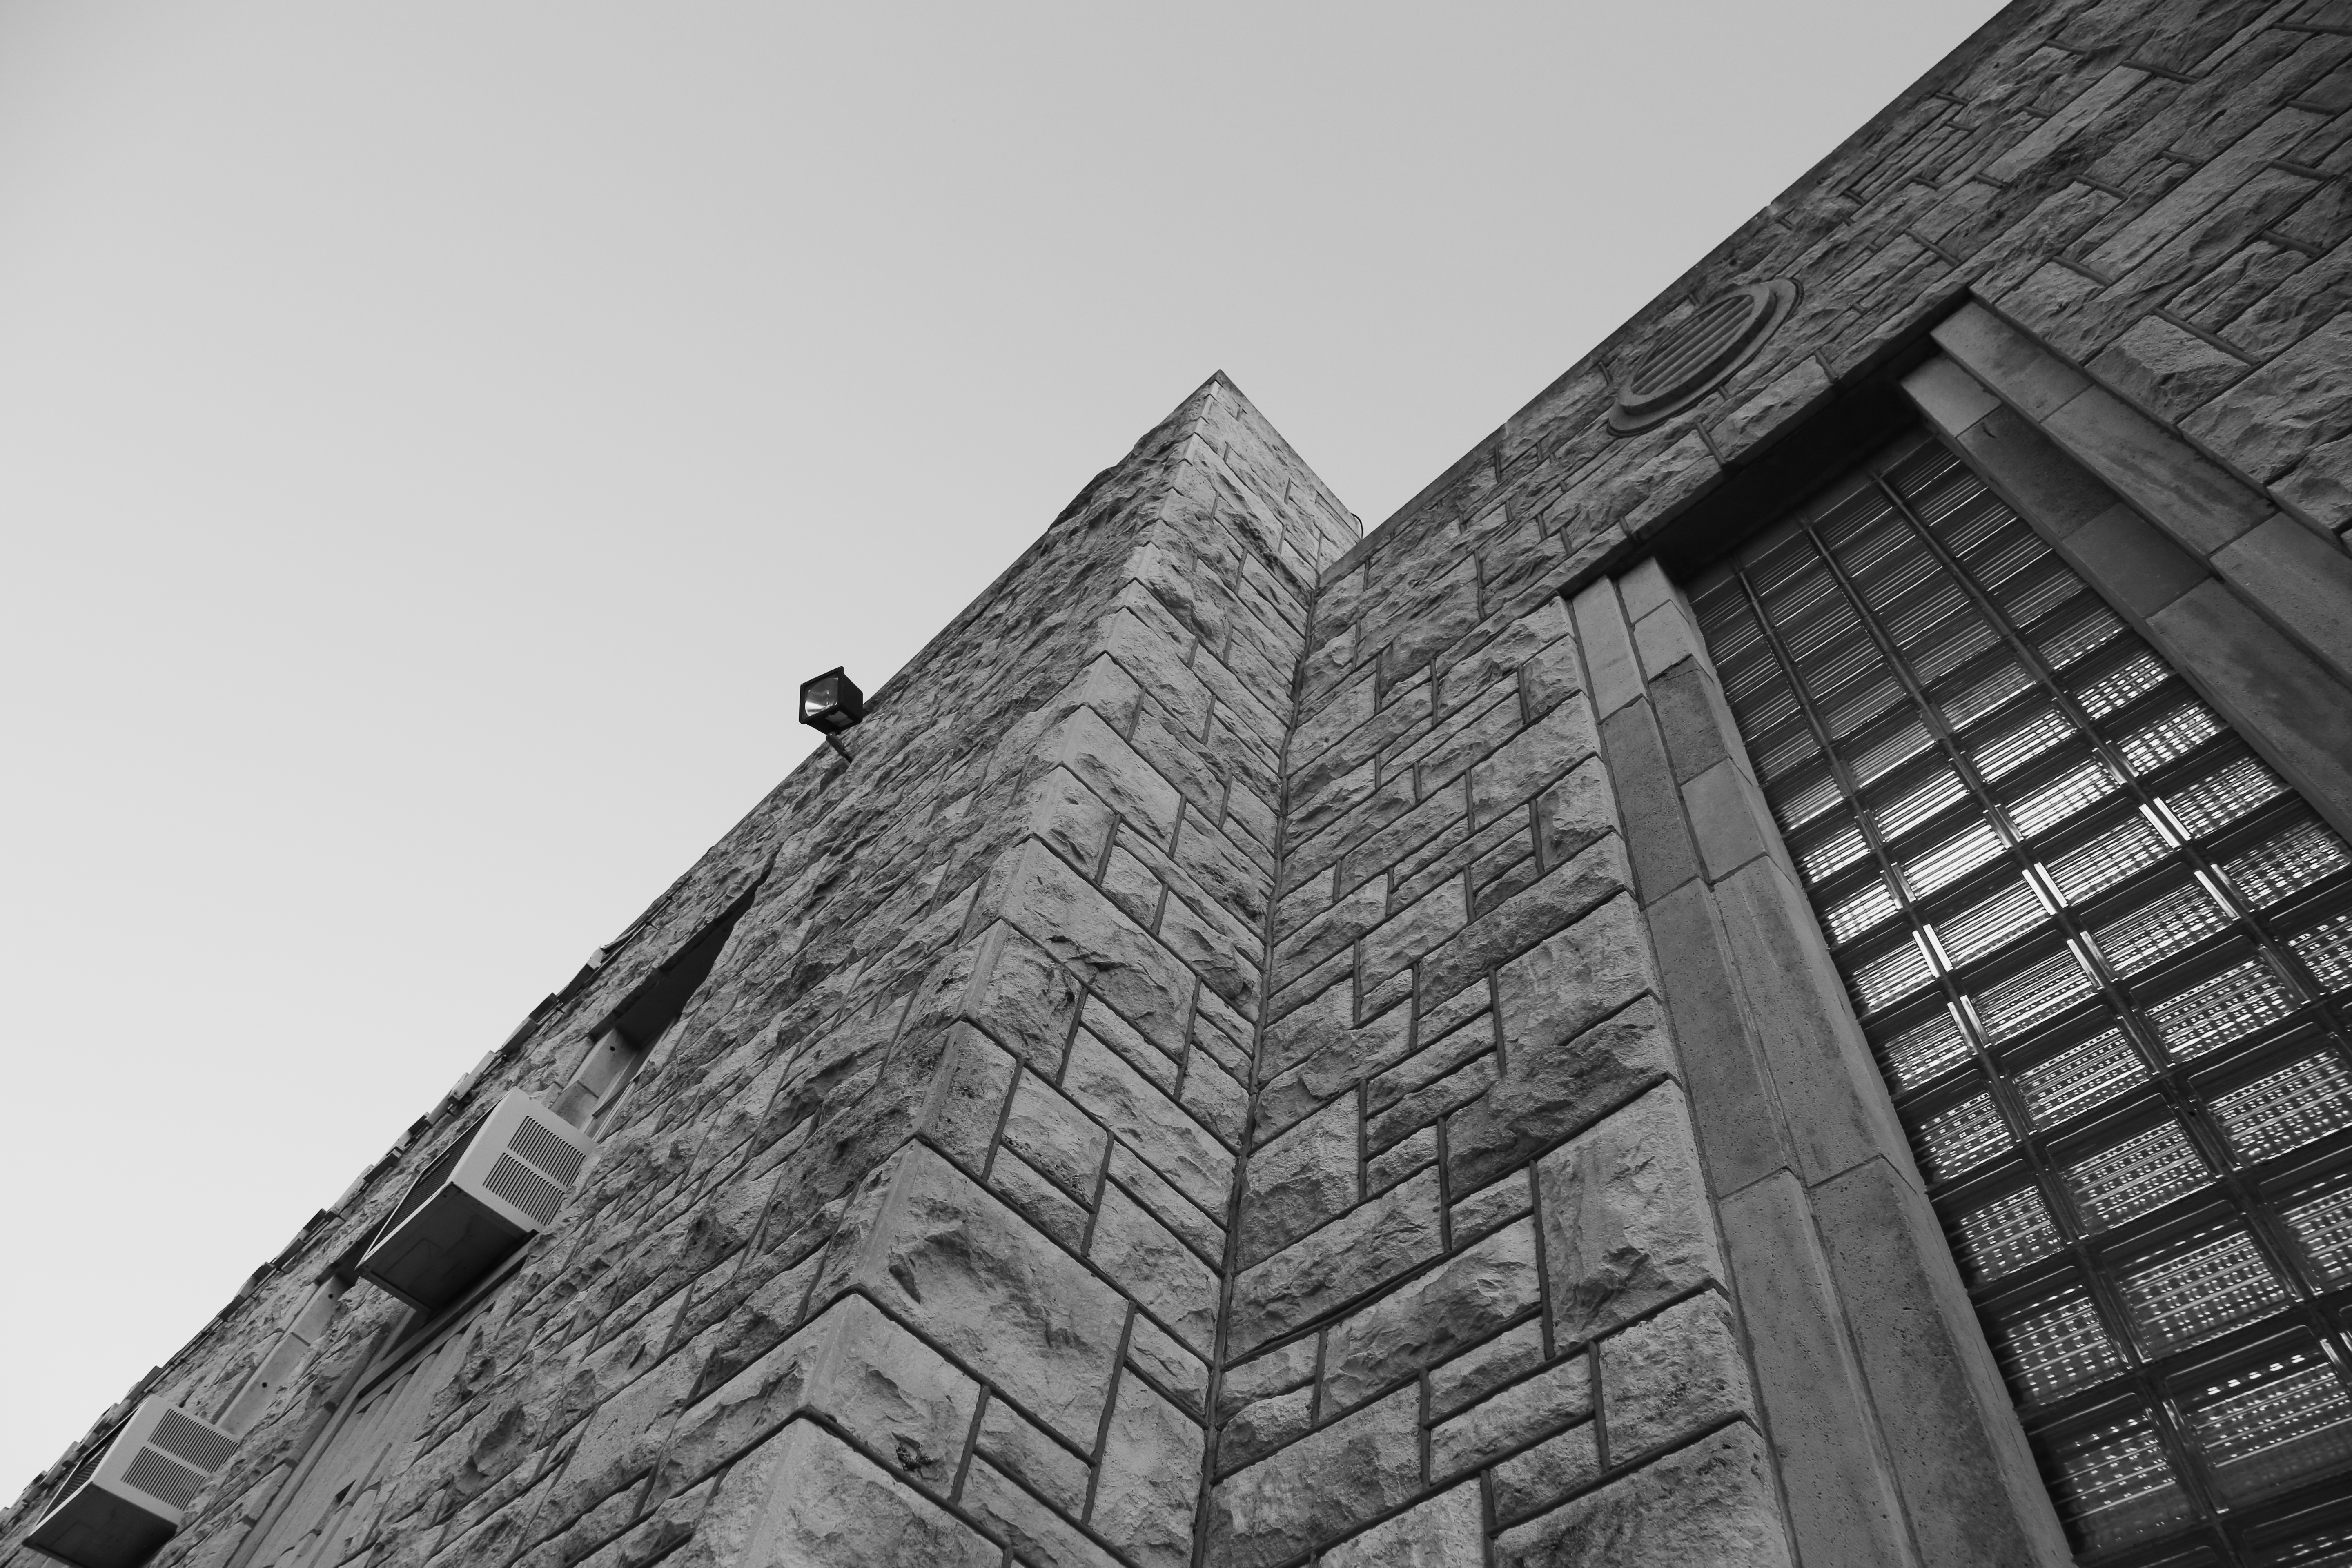 Black and white detail shot of the Military Science Building’s limestone façade